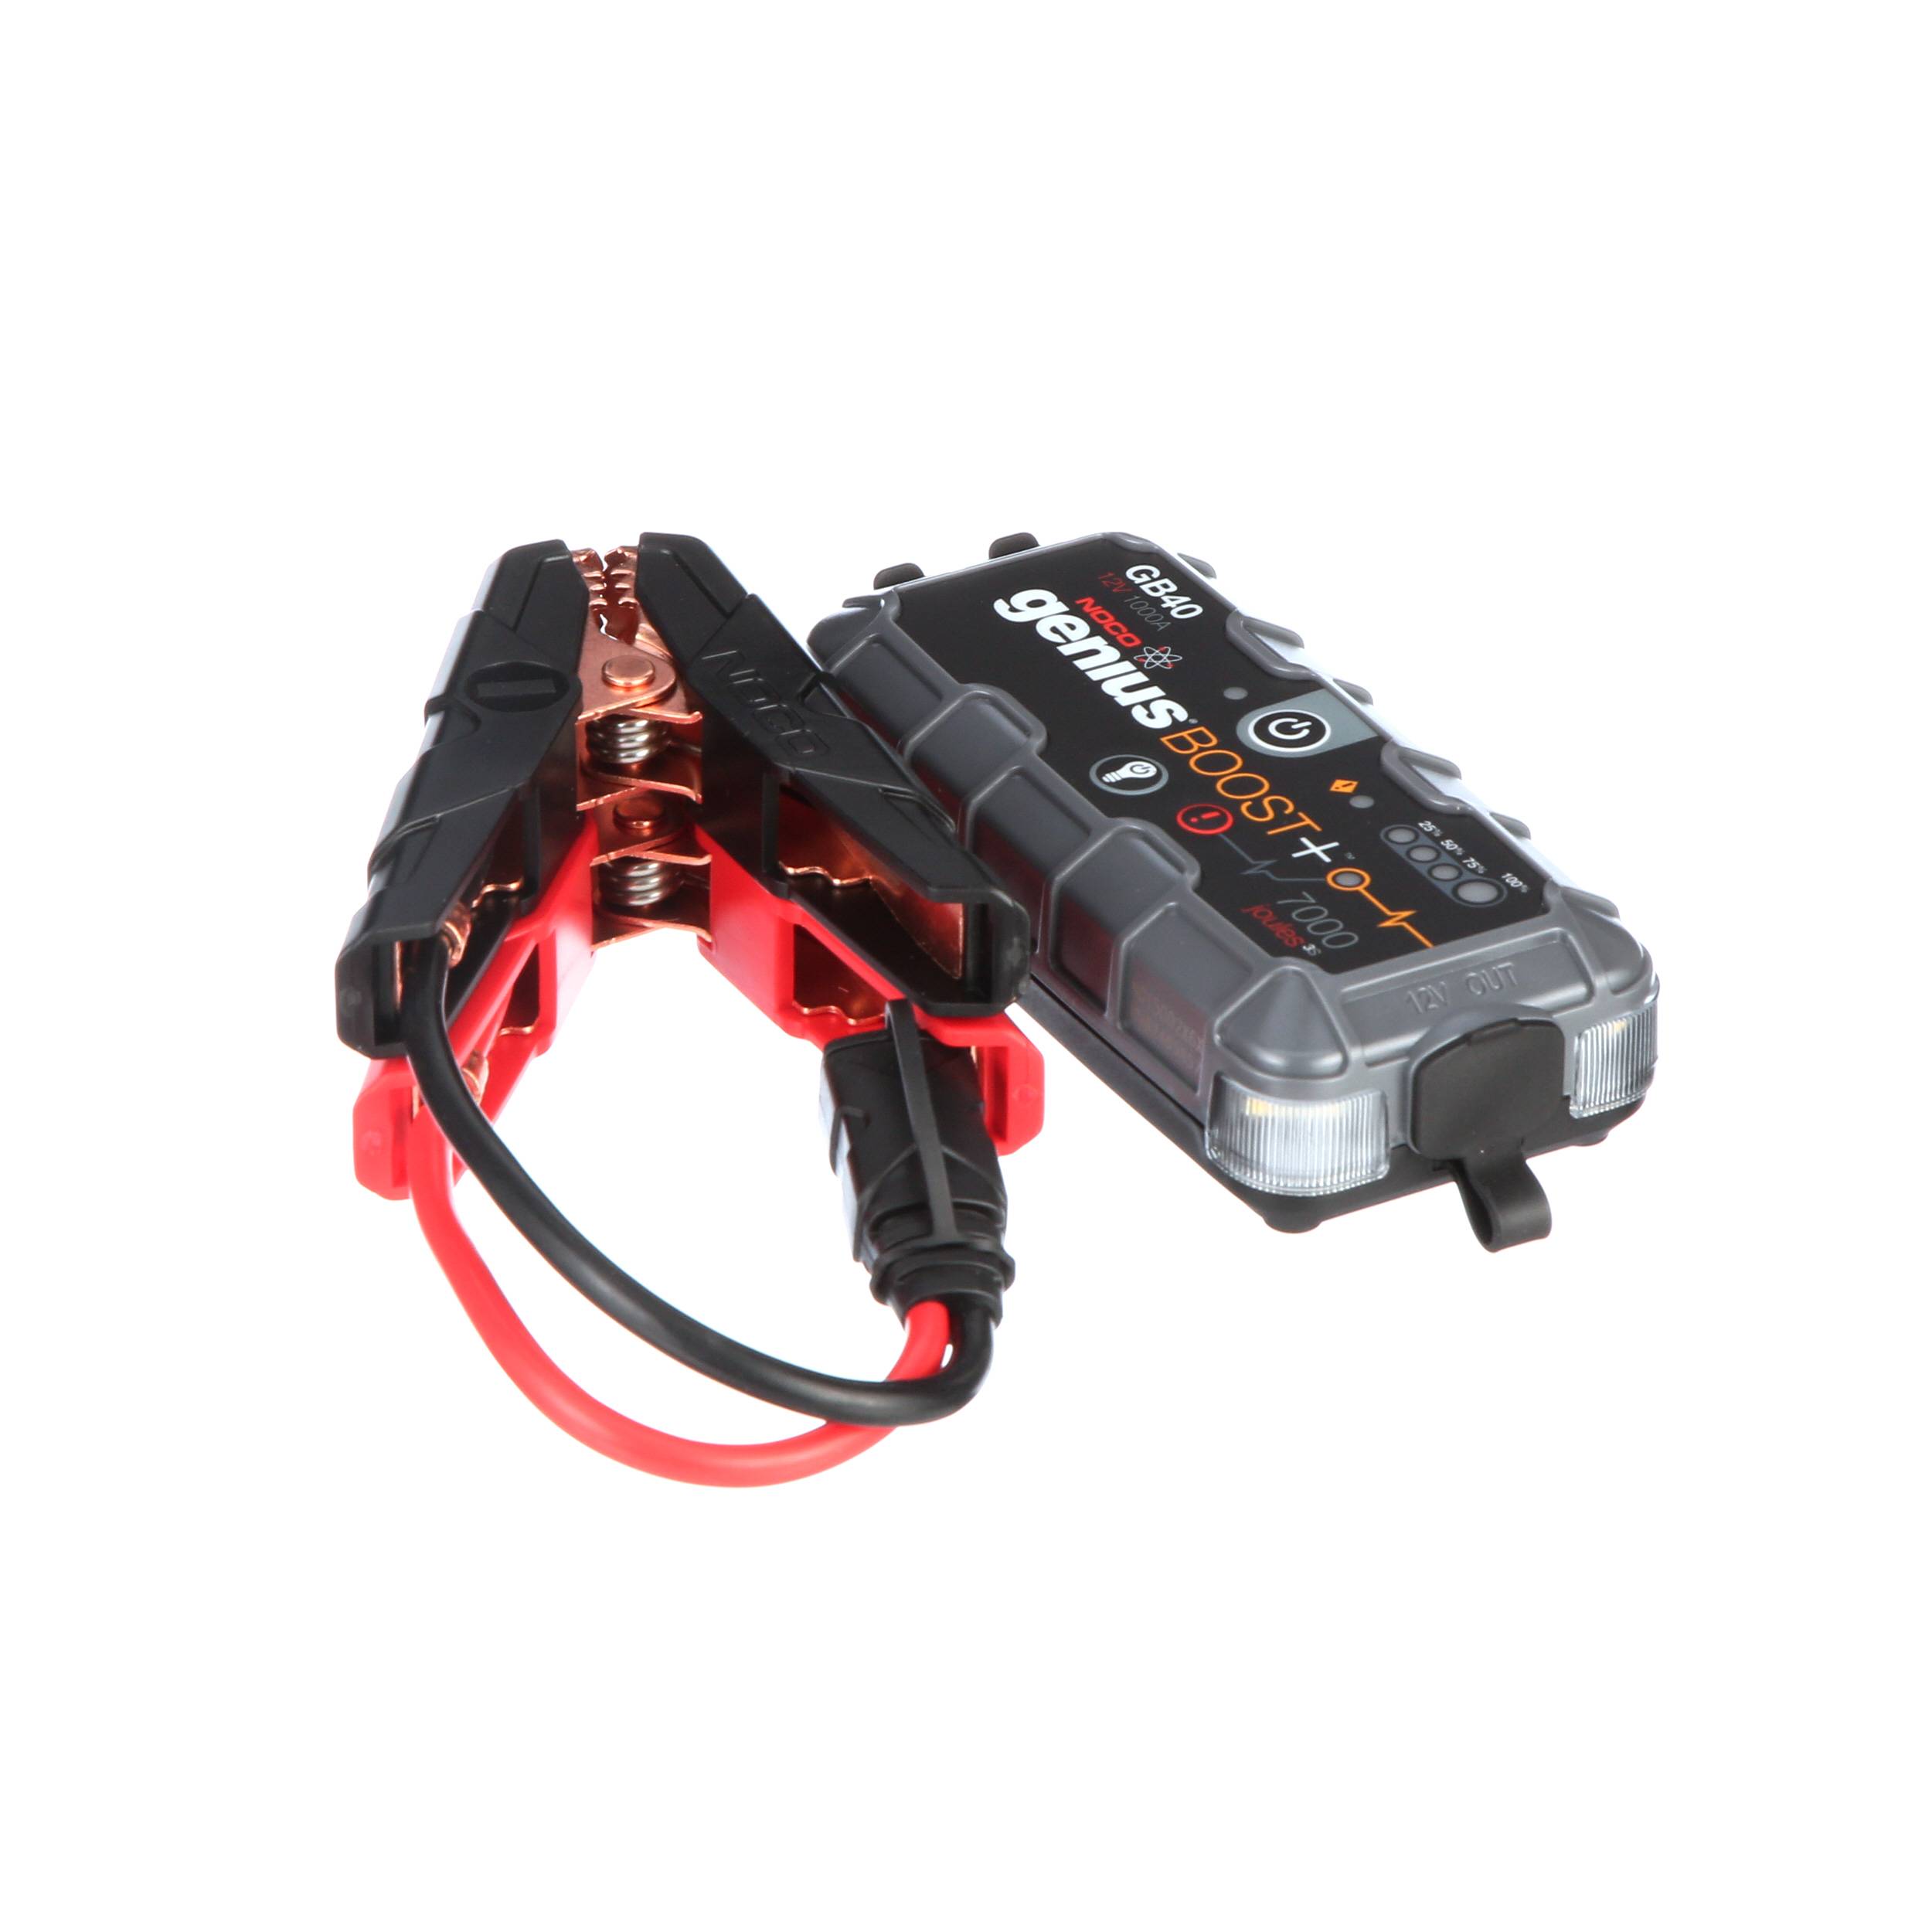 NOCO GB40 Boost Plus 1000A 12V UltraSafe lithium jump starter - Oomipood